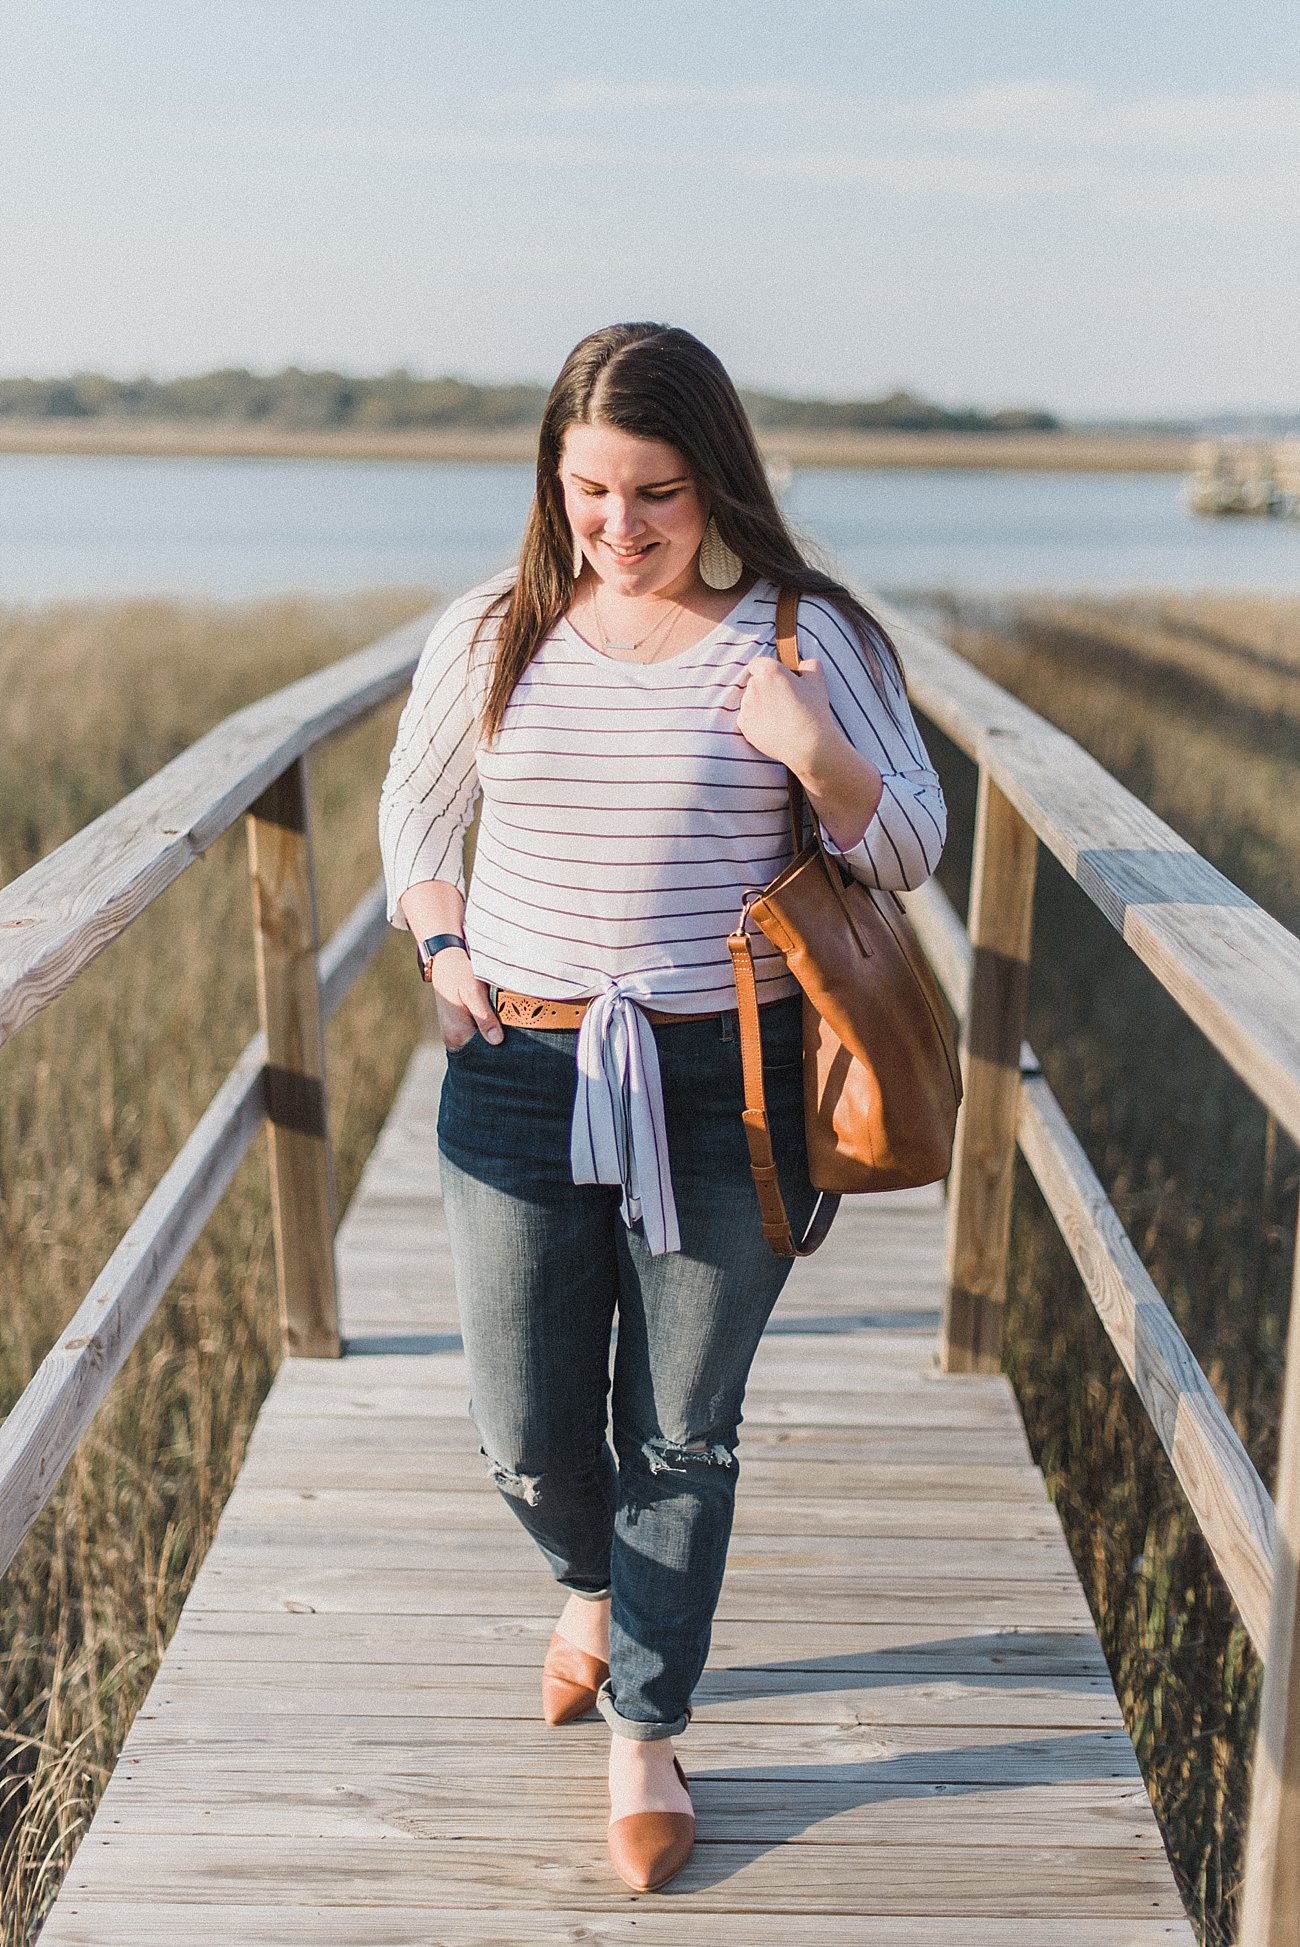 ABLE ethical fashion - High Waisted Jeans - early spring style (7) - The Best Ethically Made High Waisted Jeans by popular North Carolina ethical fashion blogger Still Being Molly